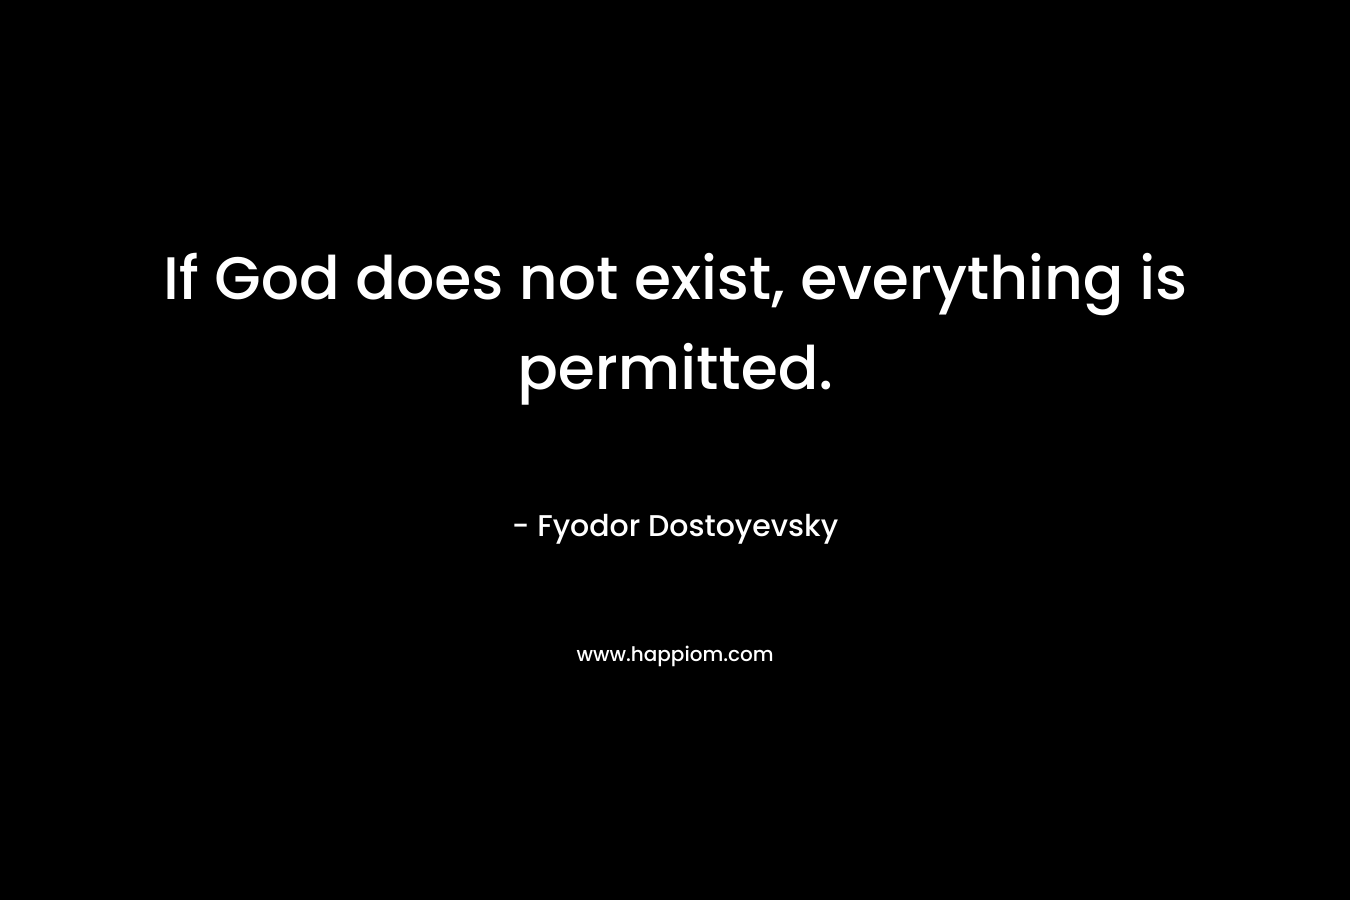 If God does not exist, everything is permitted.